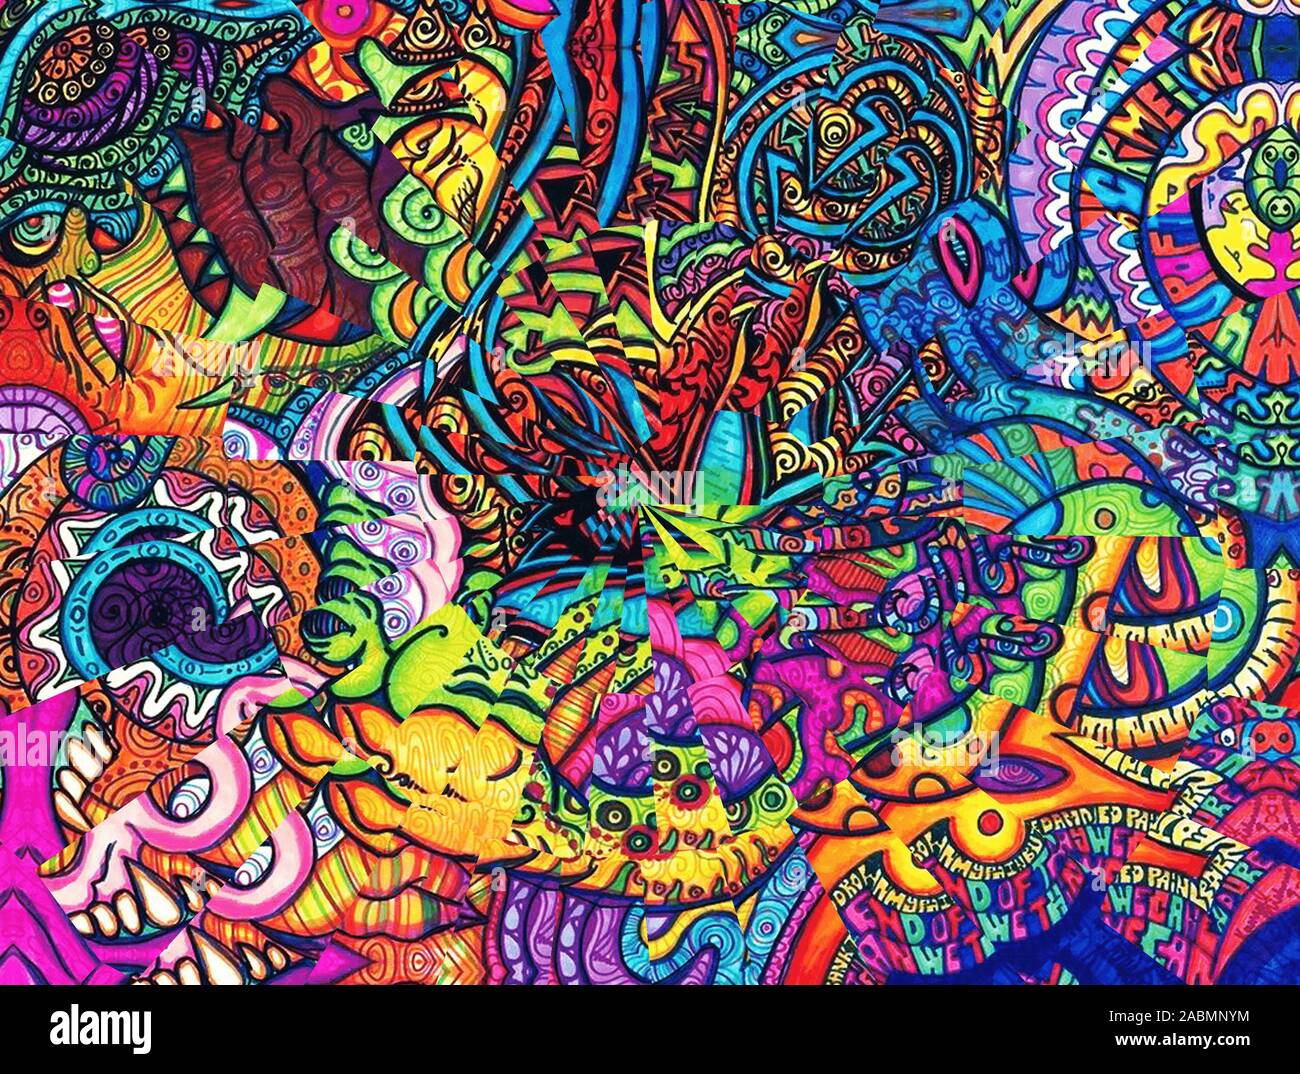 COLORFUL LSD WALLPAPERS Stock Photo - Alamy